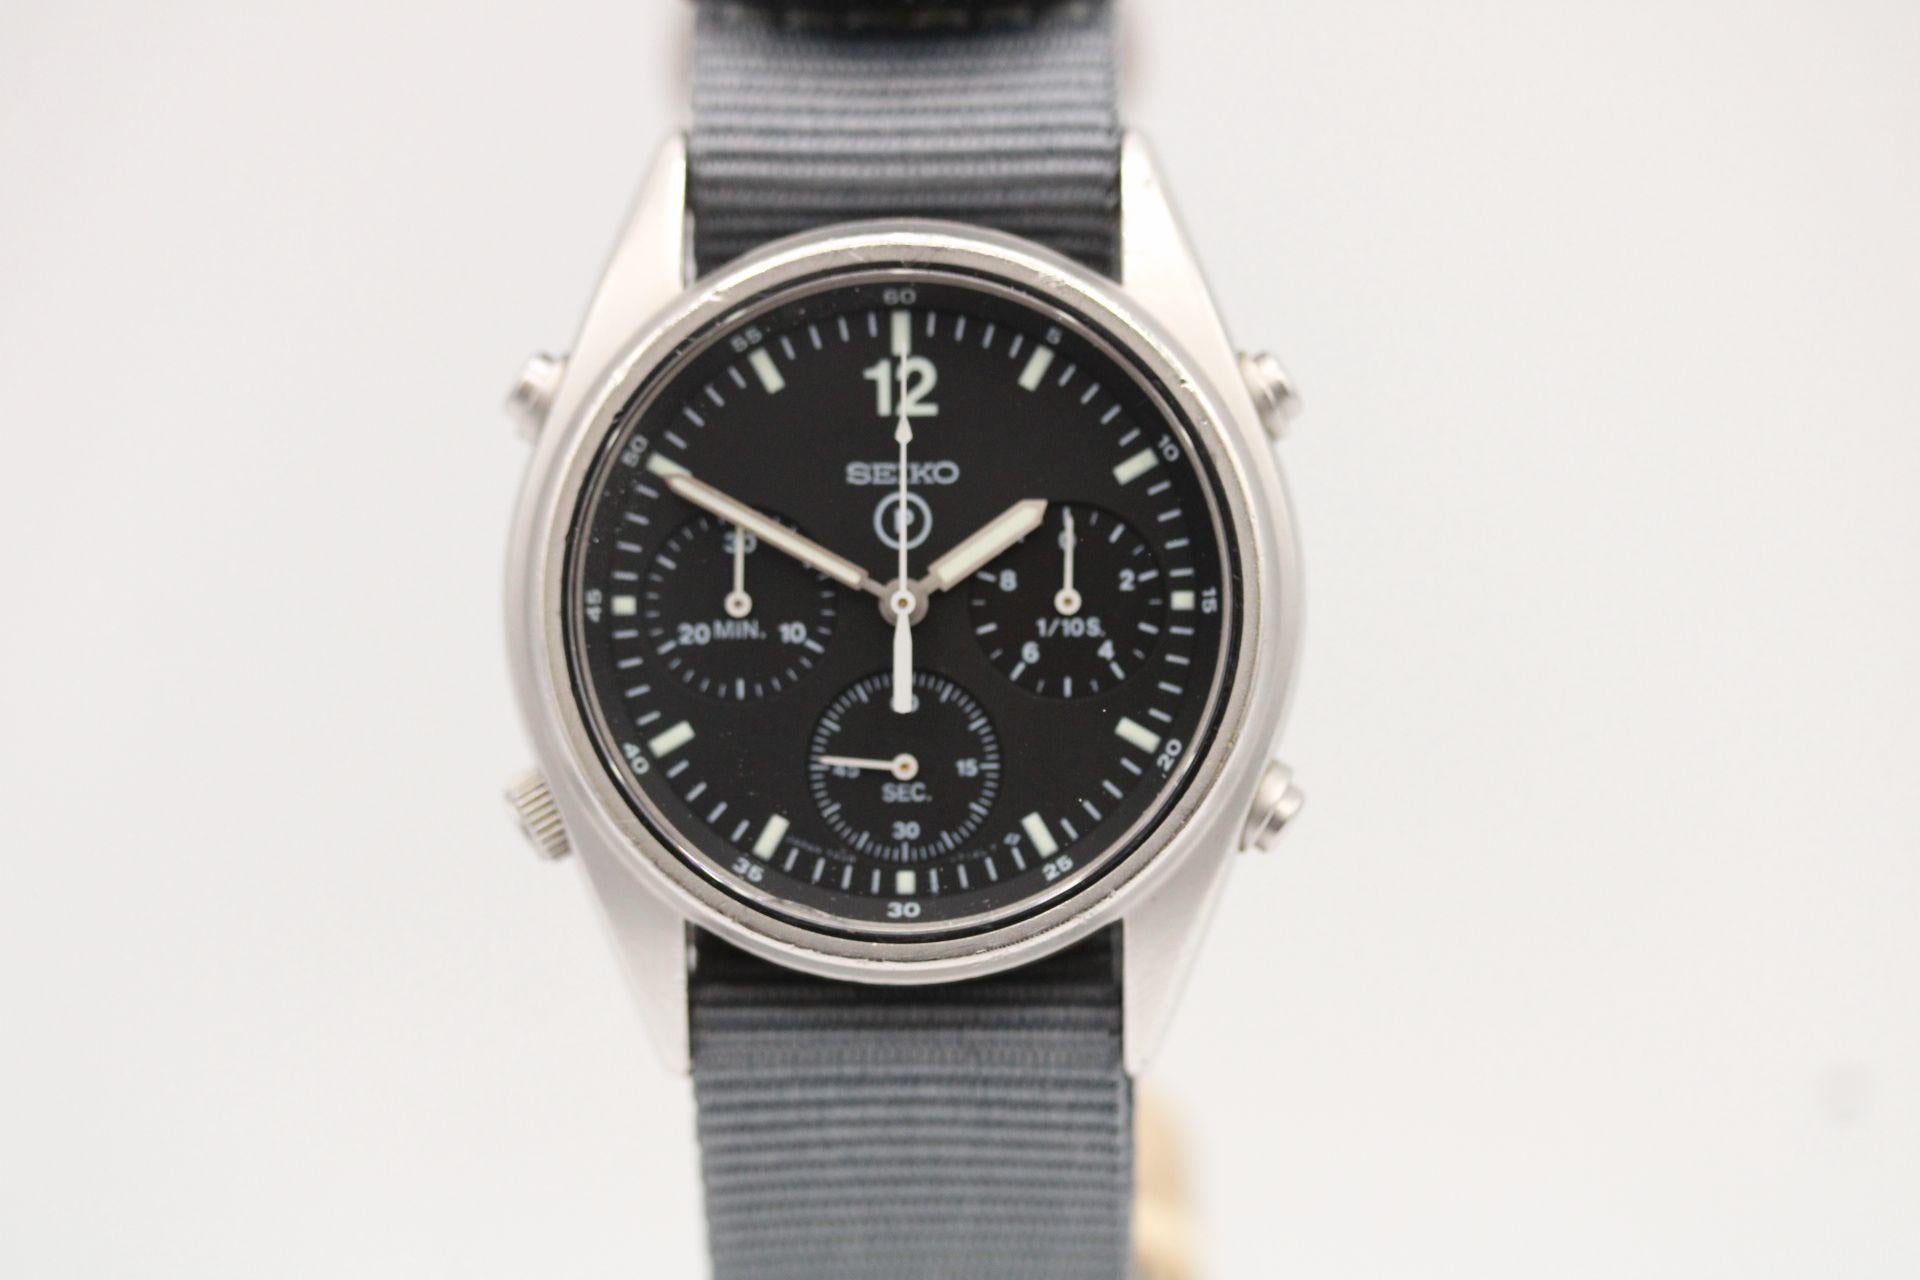 Watch: Seiko Generation 1 7A28-7120
Stock Number: CHW5420
Price: £995.00

Original, working Generation 1 Seiko Chronograph made for the British RAF in 1984. Having been used in service as a tool watch will show some signs of age and minor blemishes